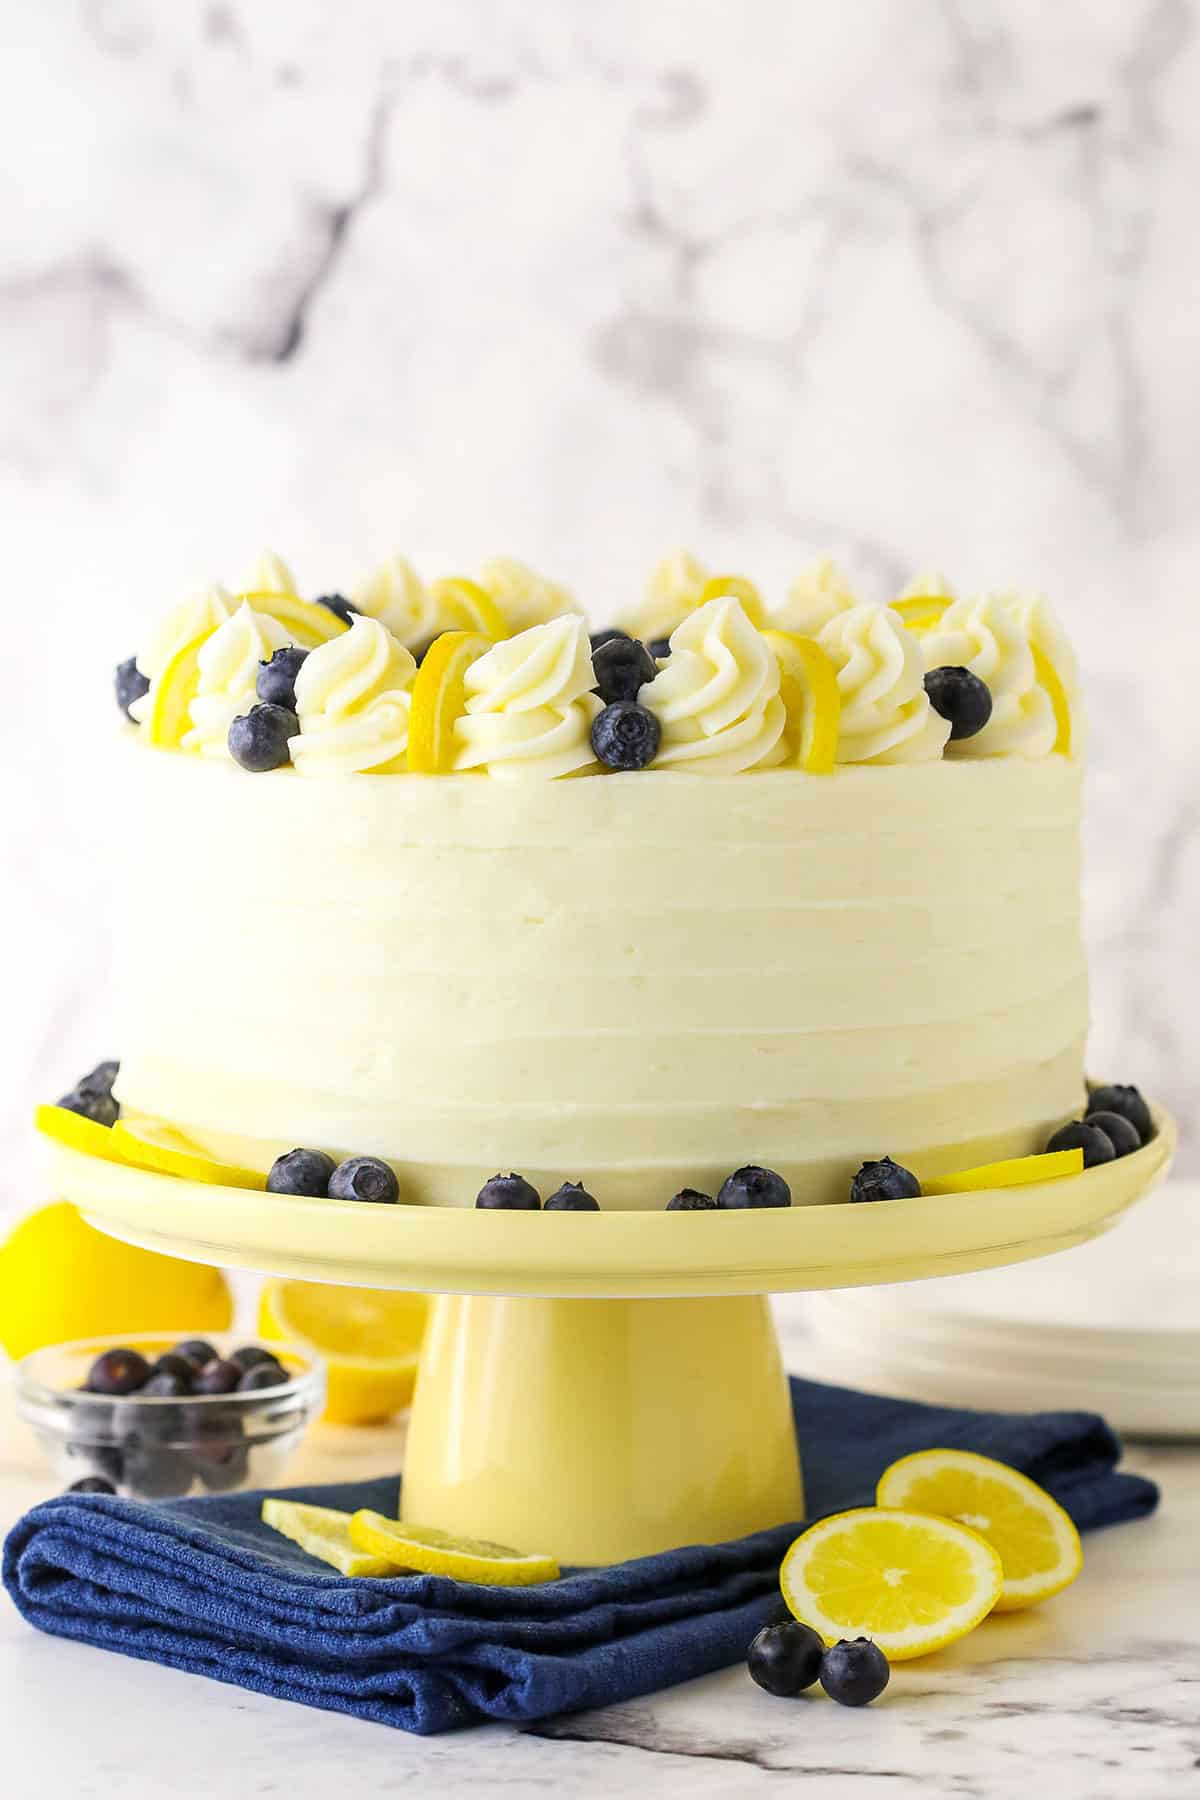 Side view of a full Lemon Blueberry Layer Cake with white swirls, blueberries and cut lemons on a yellow cake stand